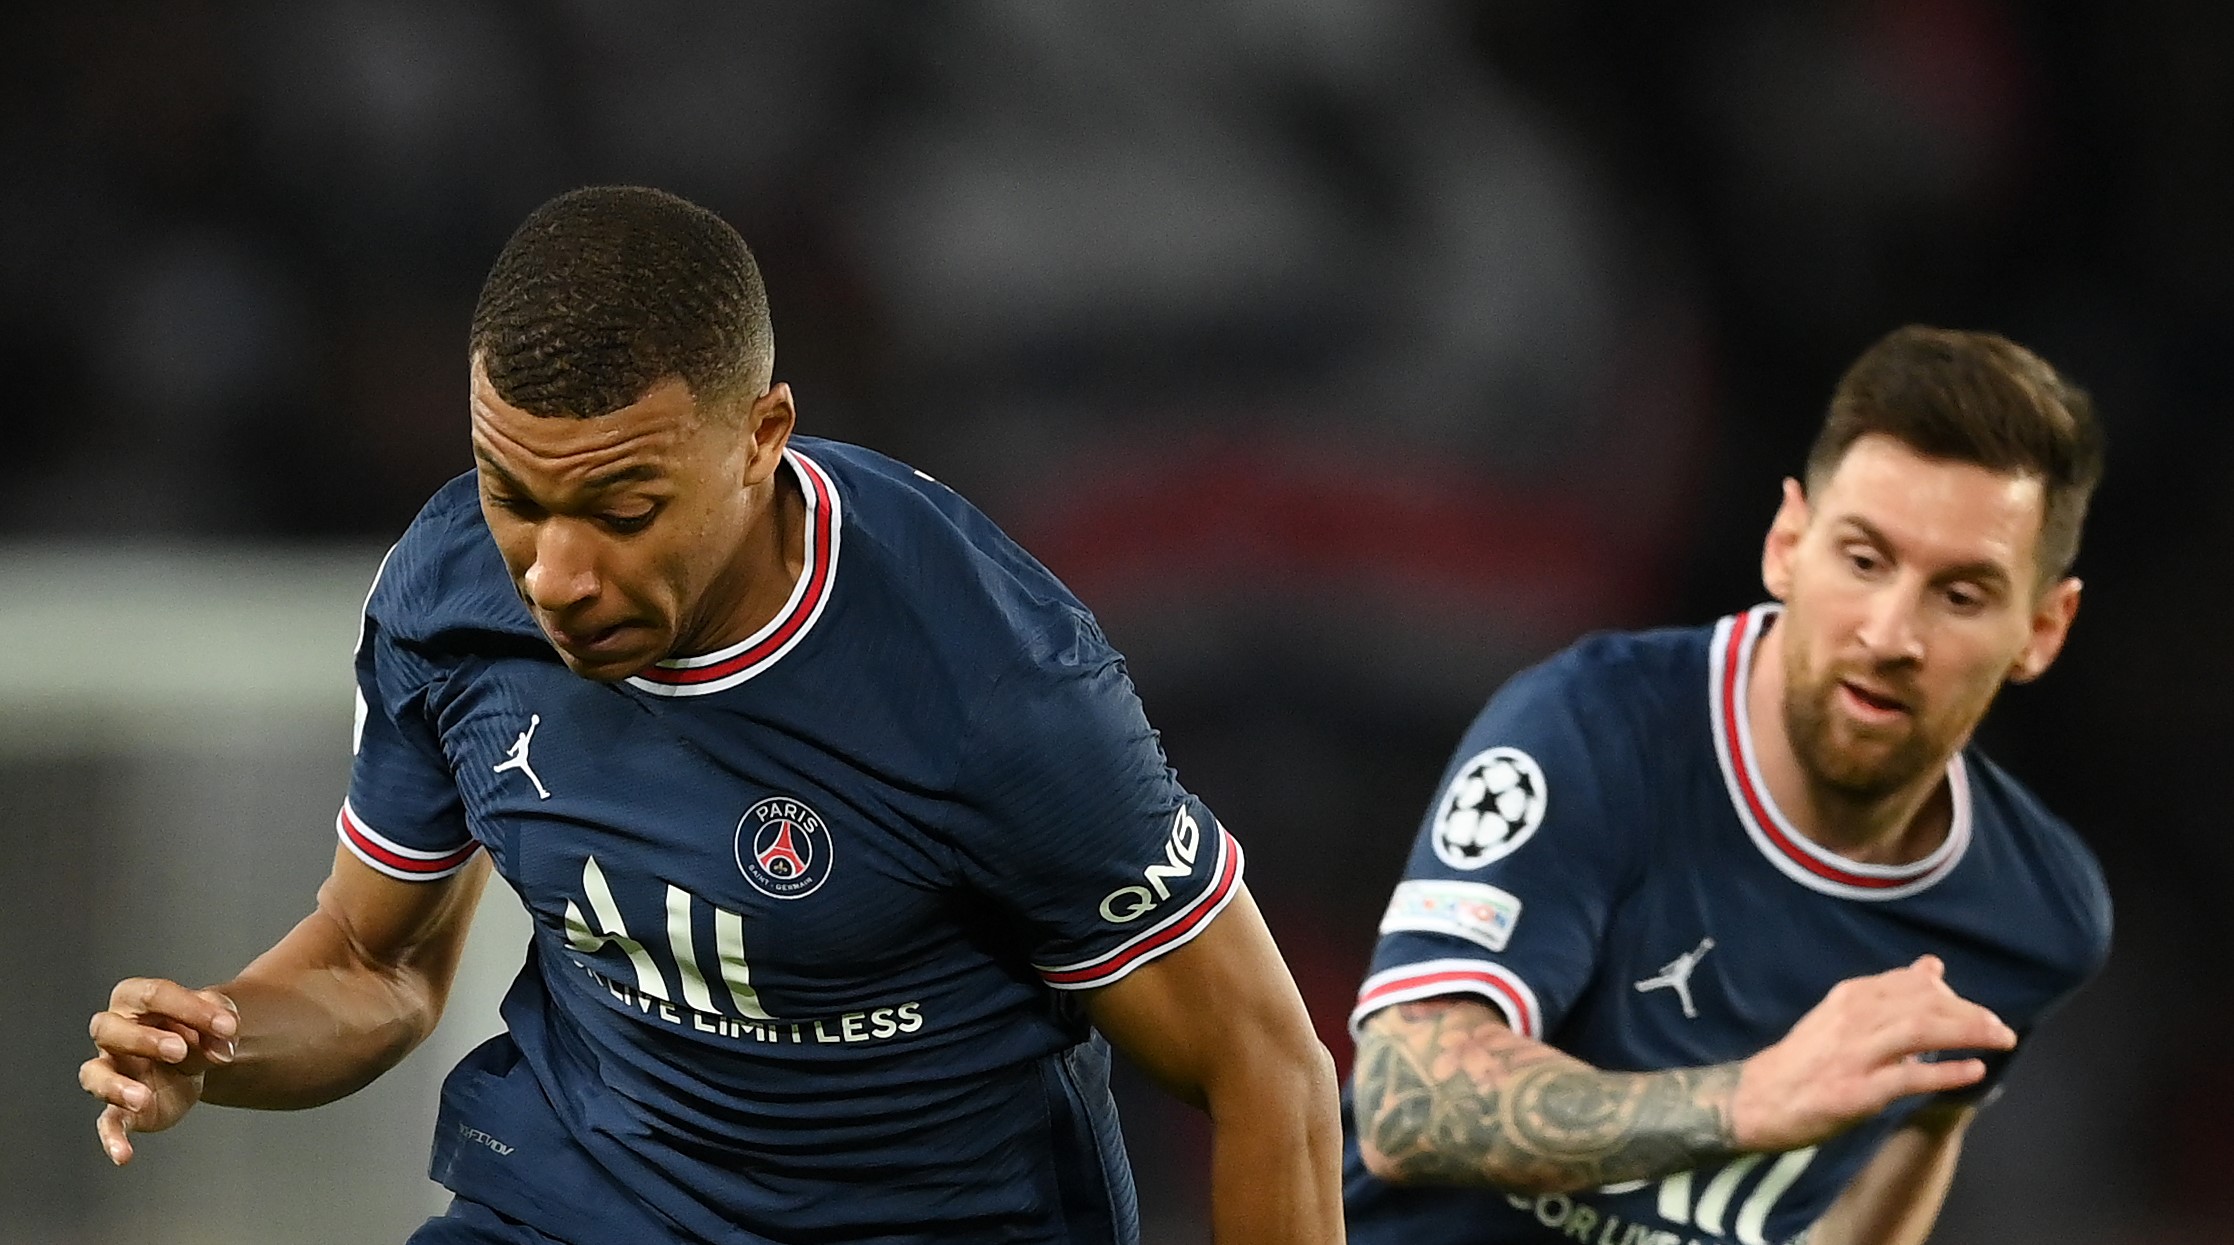 PSG's second place in Group Stage guarantees them a tough opponent for ...